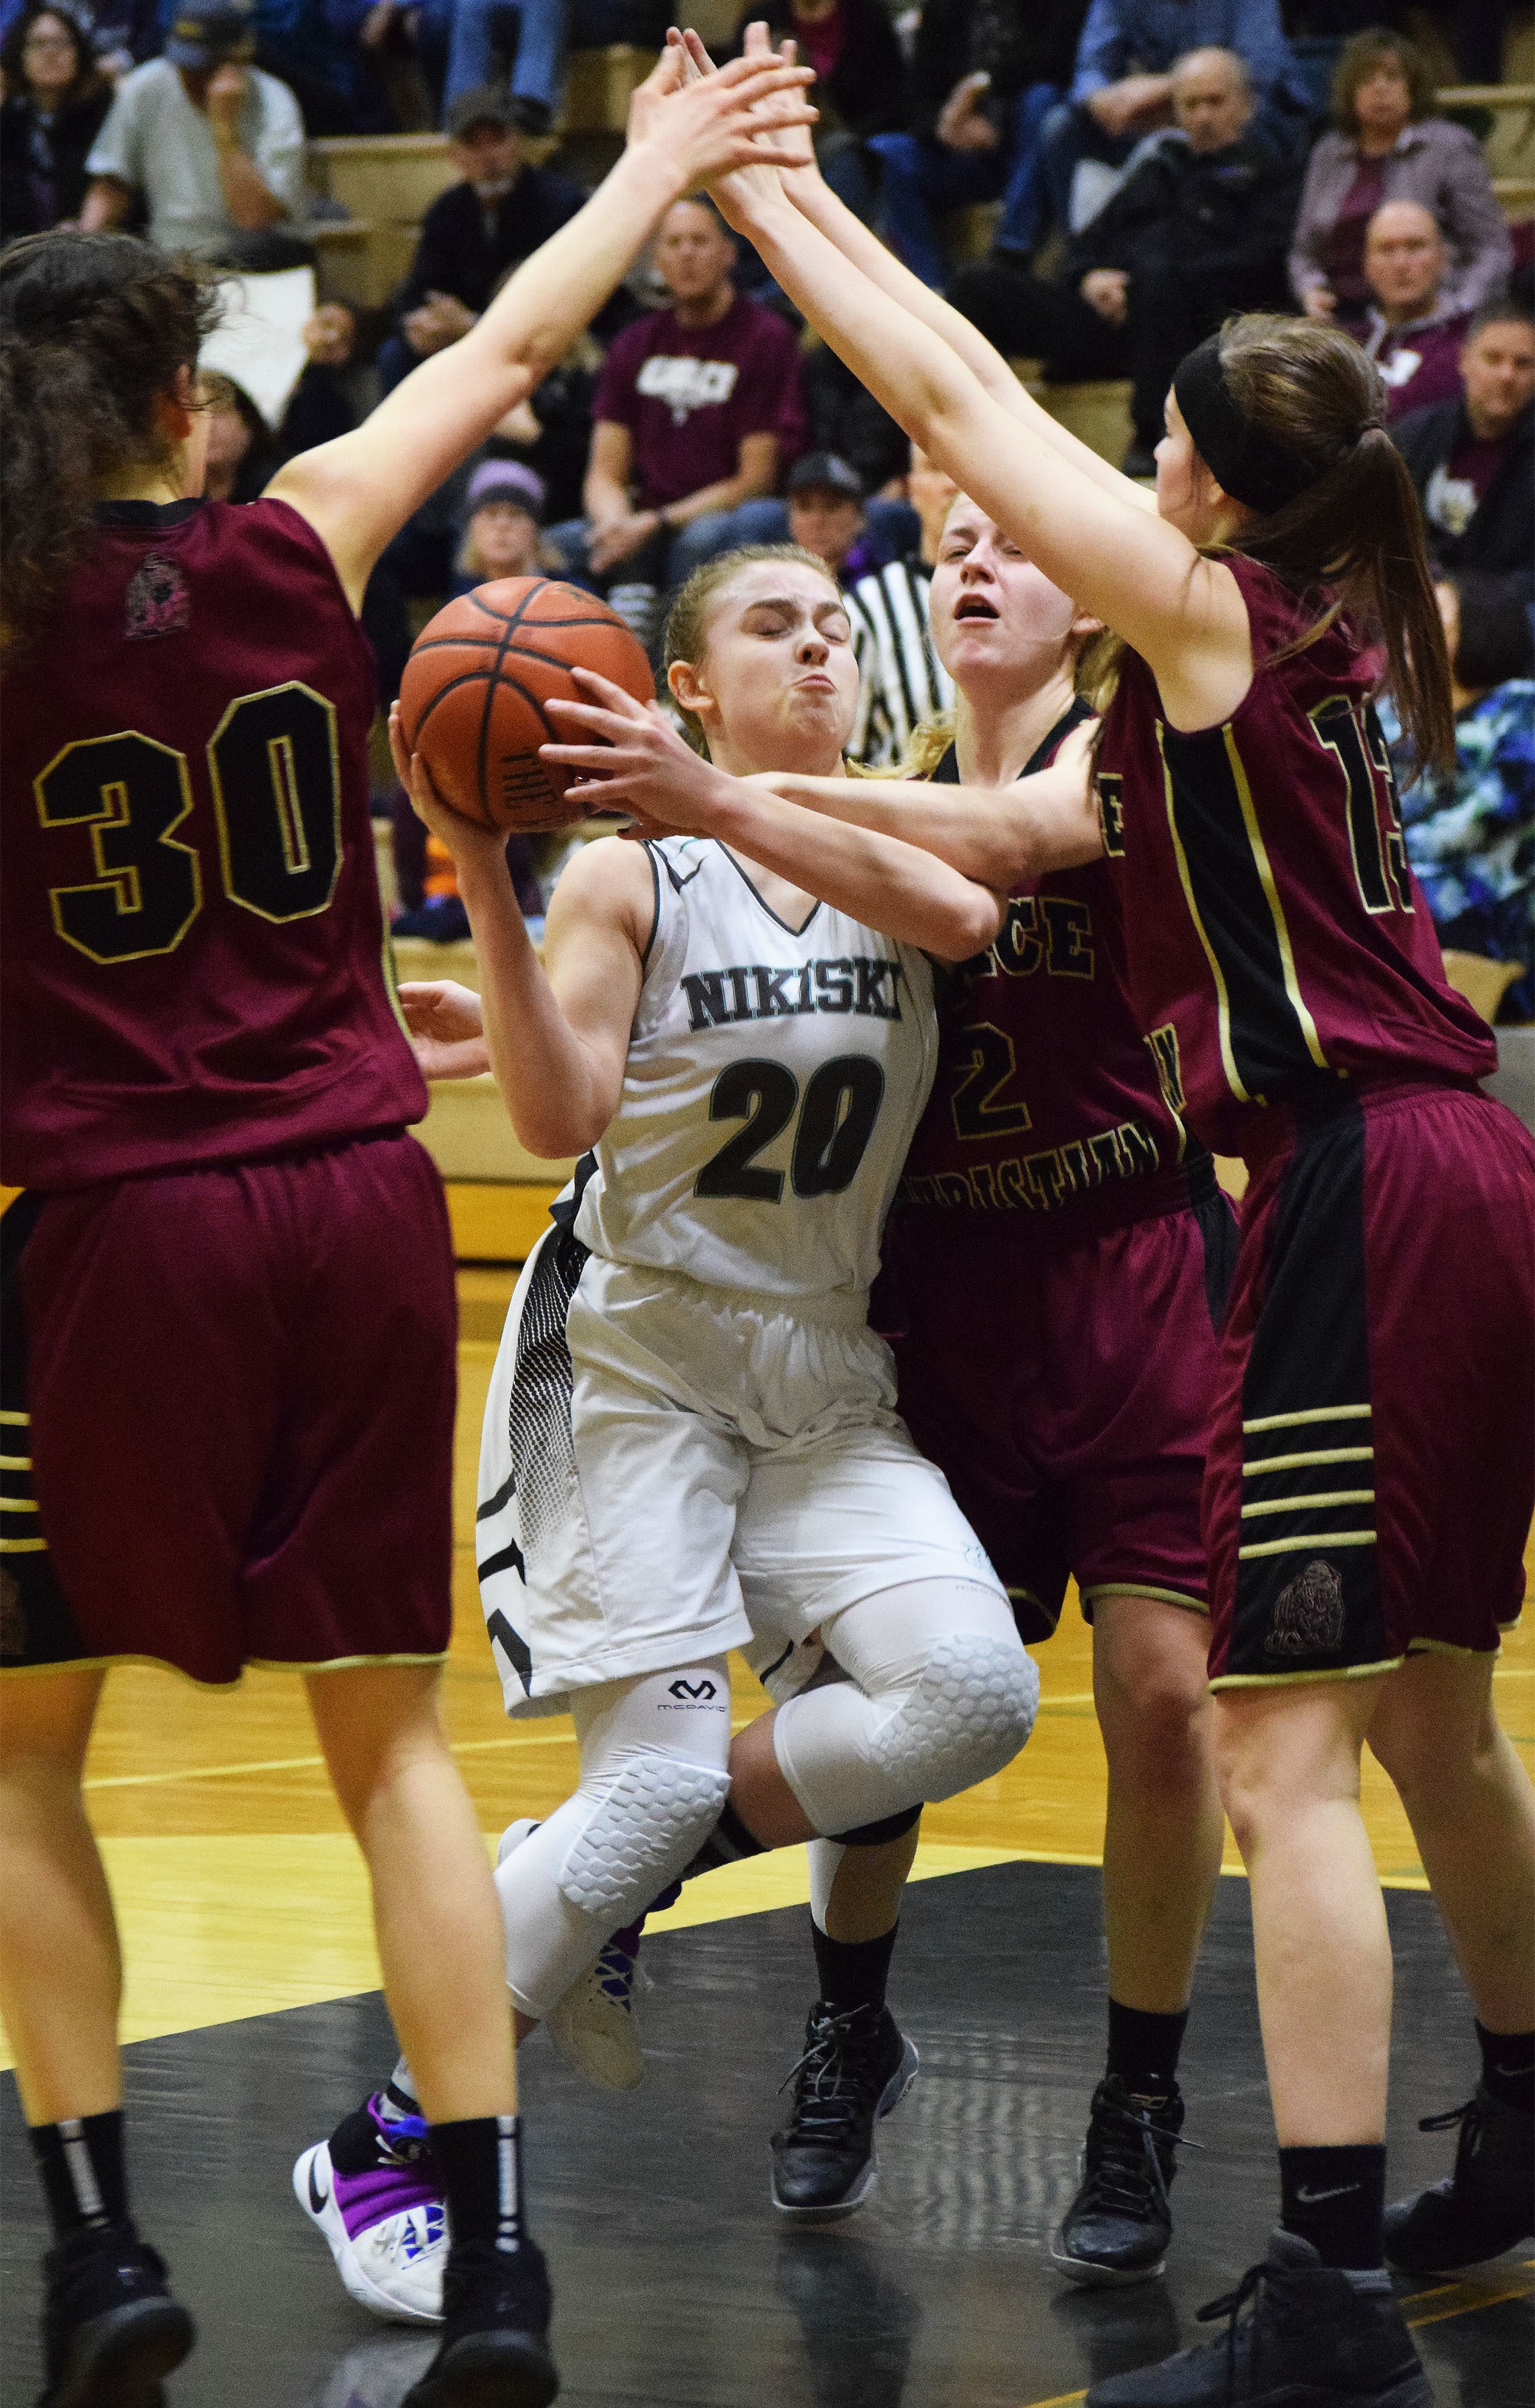 Nikiski guard Bethany Carstens (20) works to find a way through a horde of Grace Christian defenders Friday night at Nikiski High School. (Photo by Joey Klecka/Peninsula Clarion)